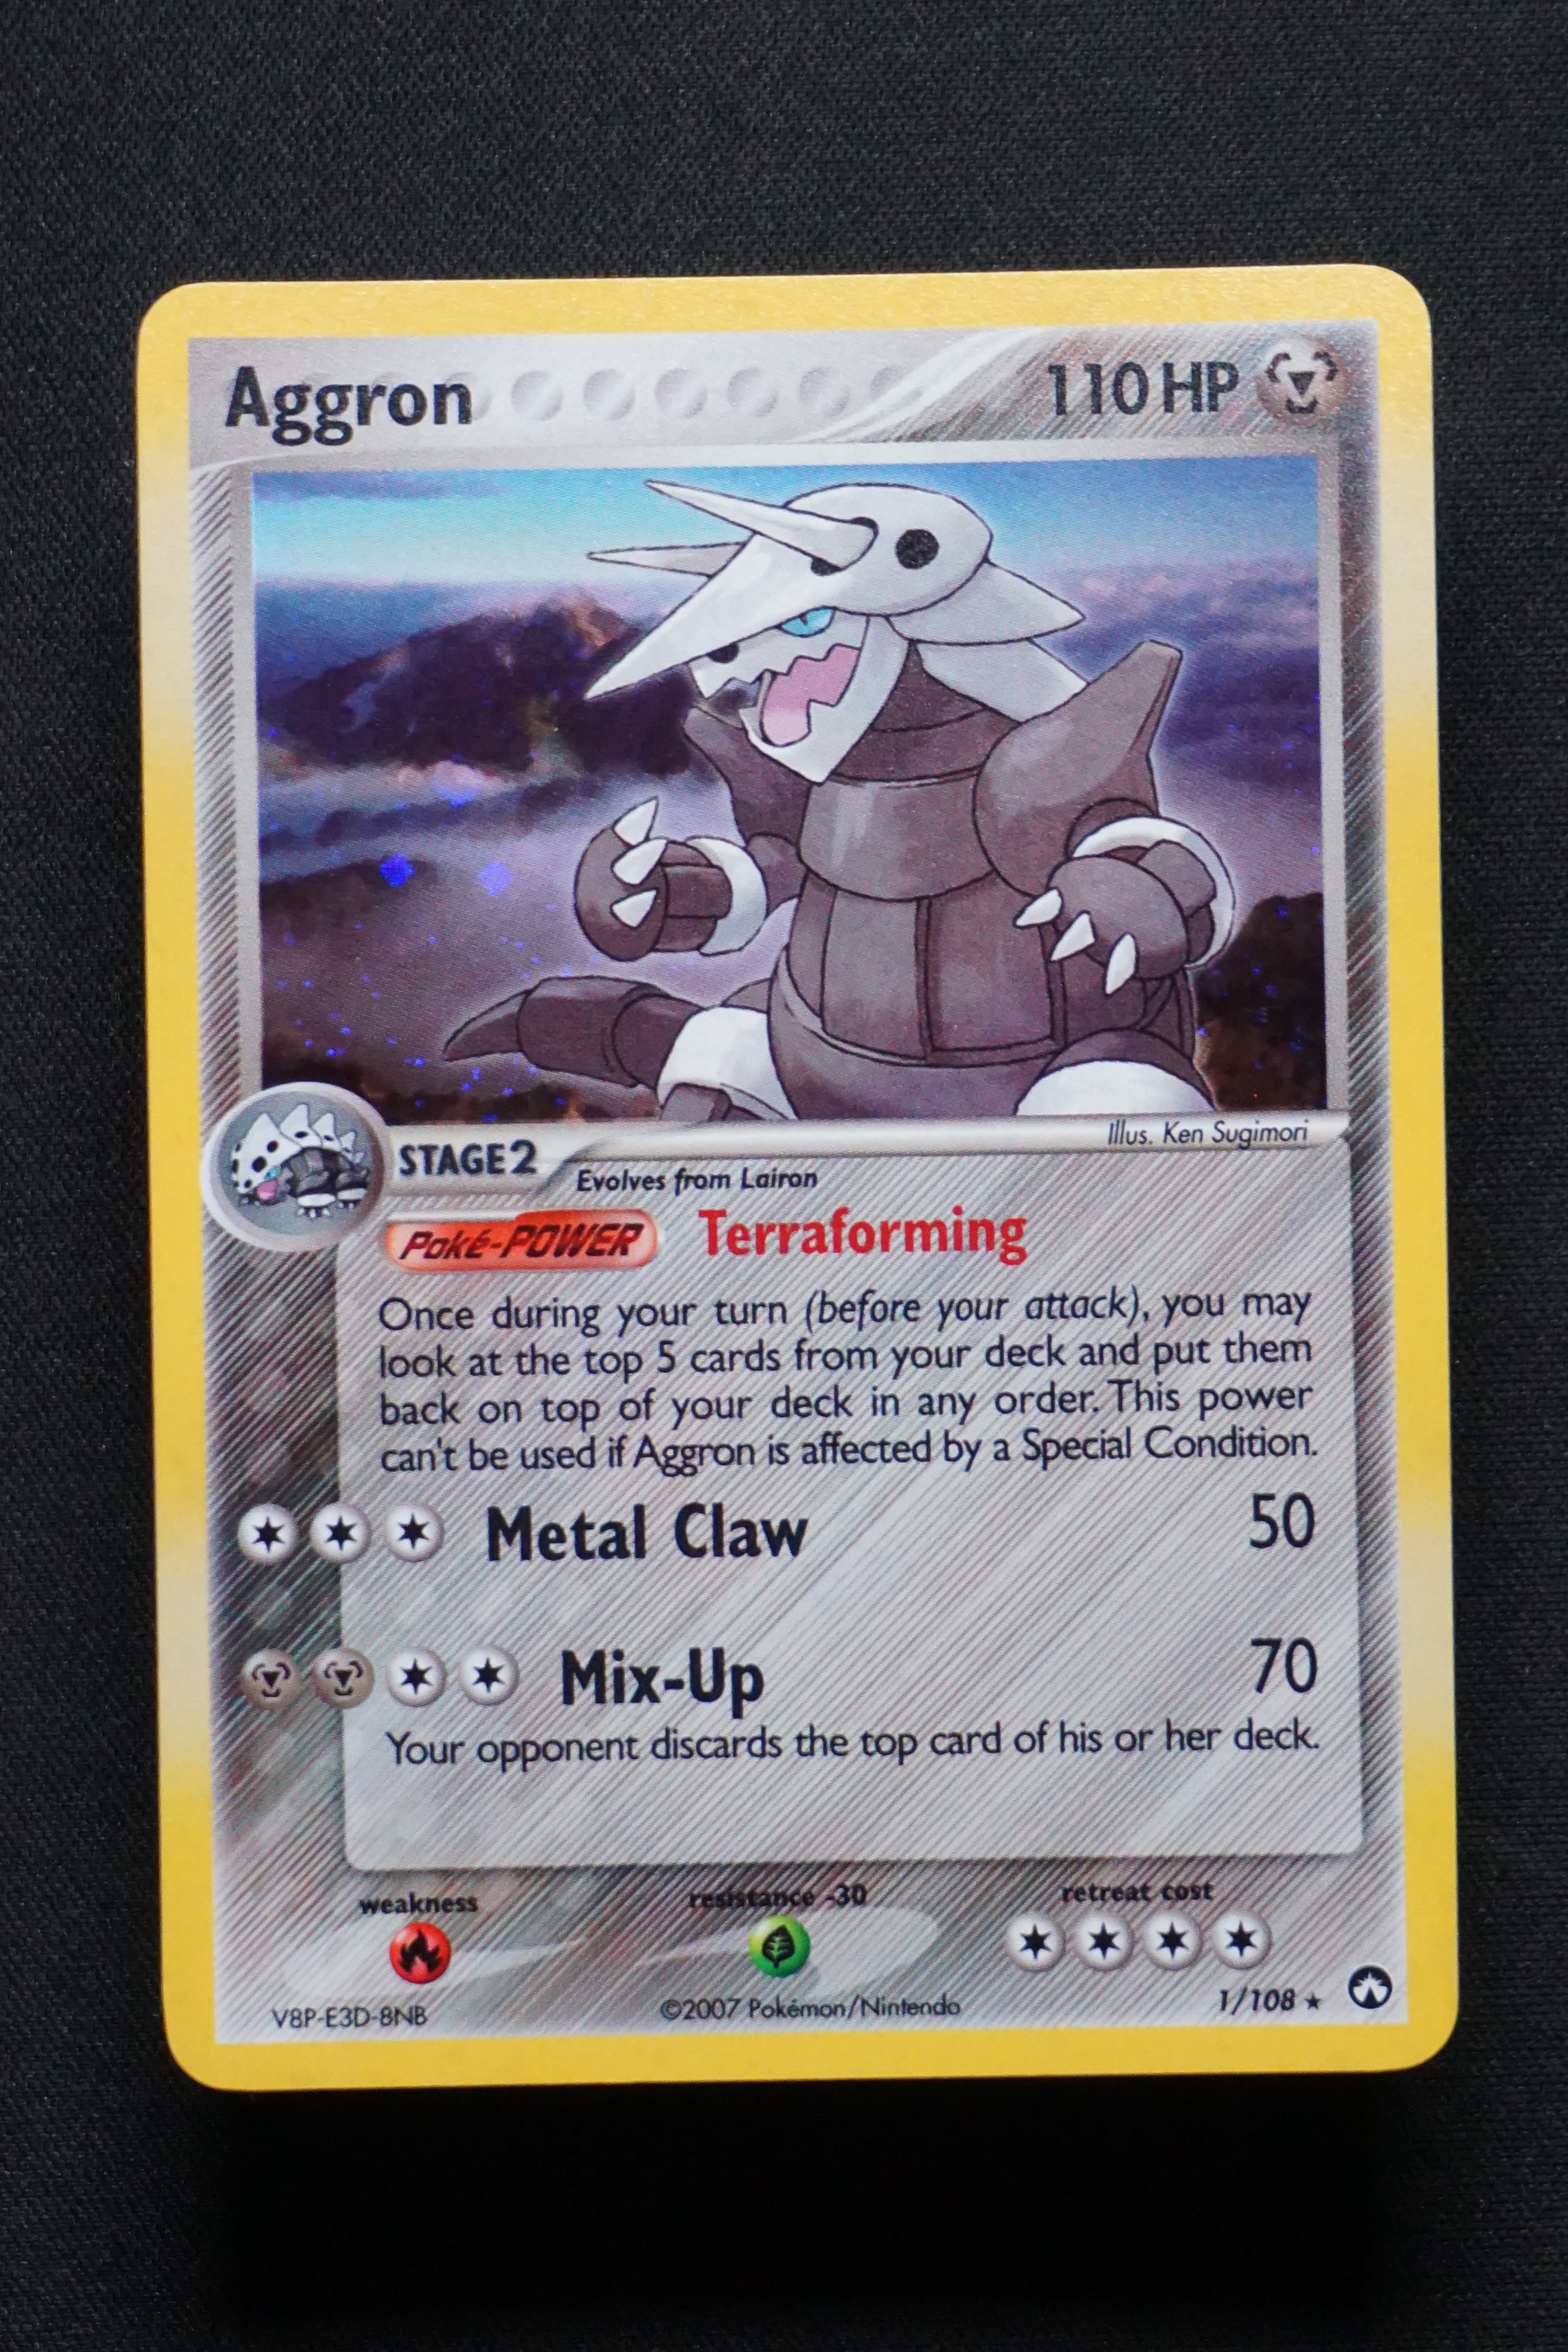 Aggron 1/108 - ex Power Keepers - Holo - Near Mint